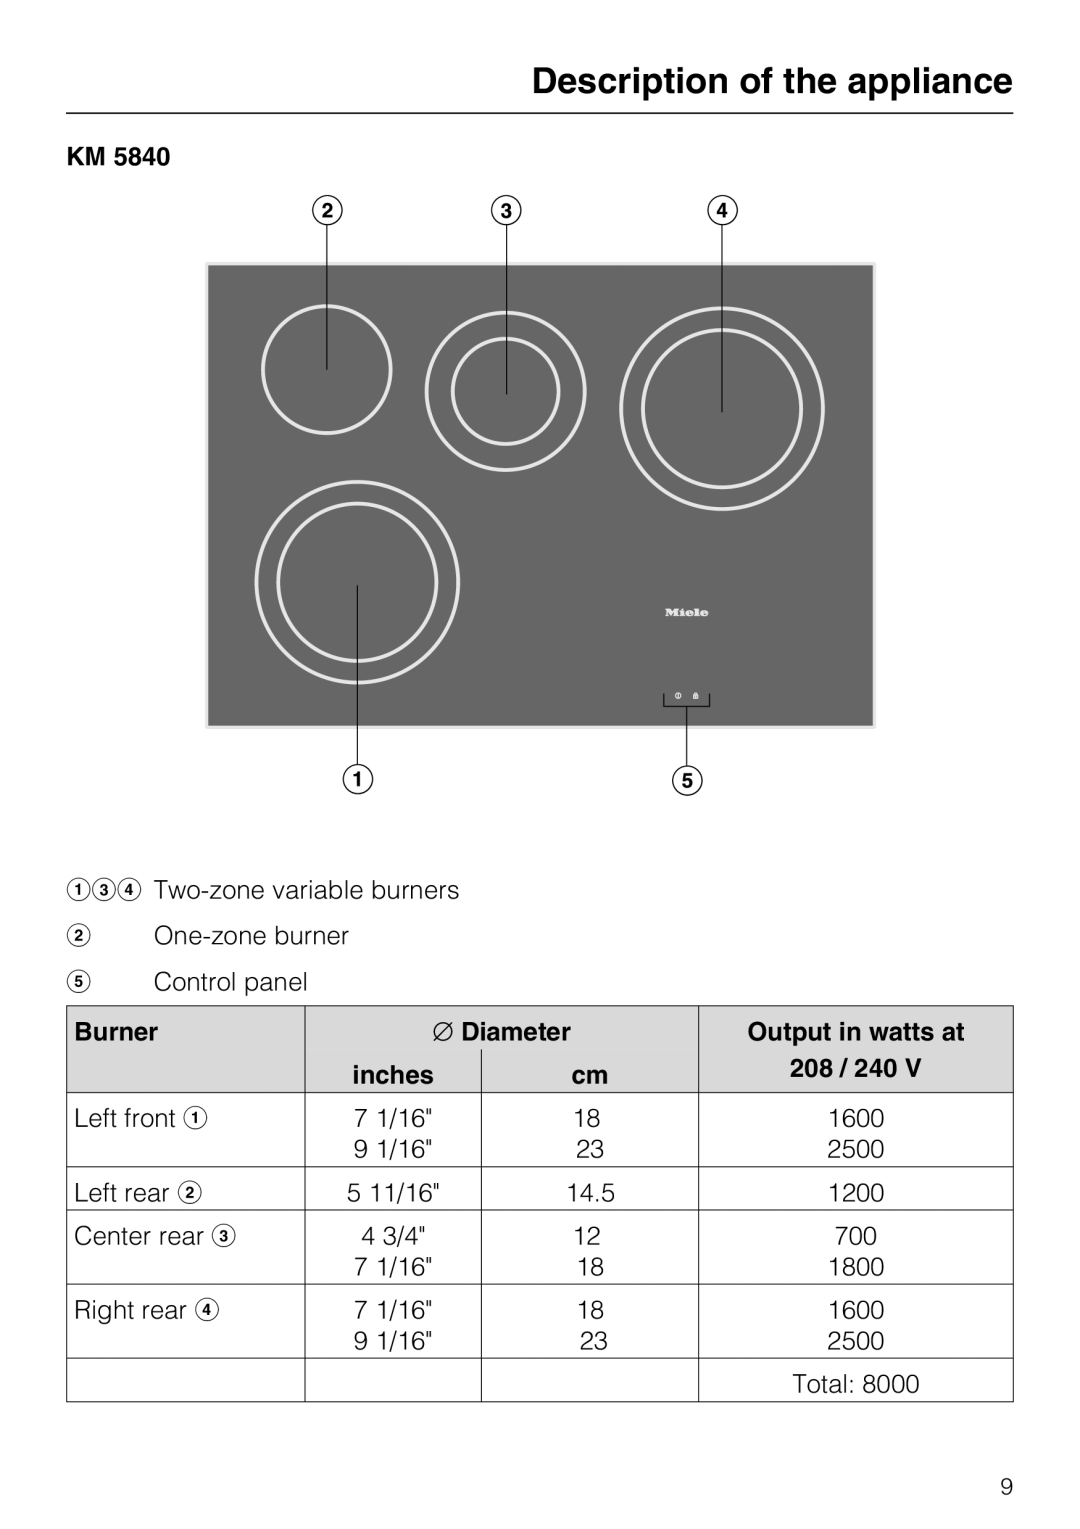 Miele KM 5860, KM 5880, KM 5840 Description of the appliance, Burner, Diameter, Output in watts at, inches, 208 